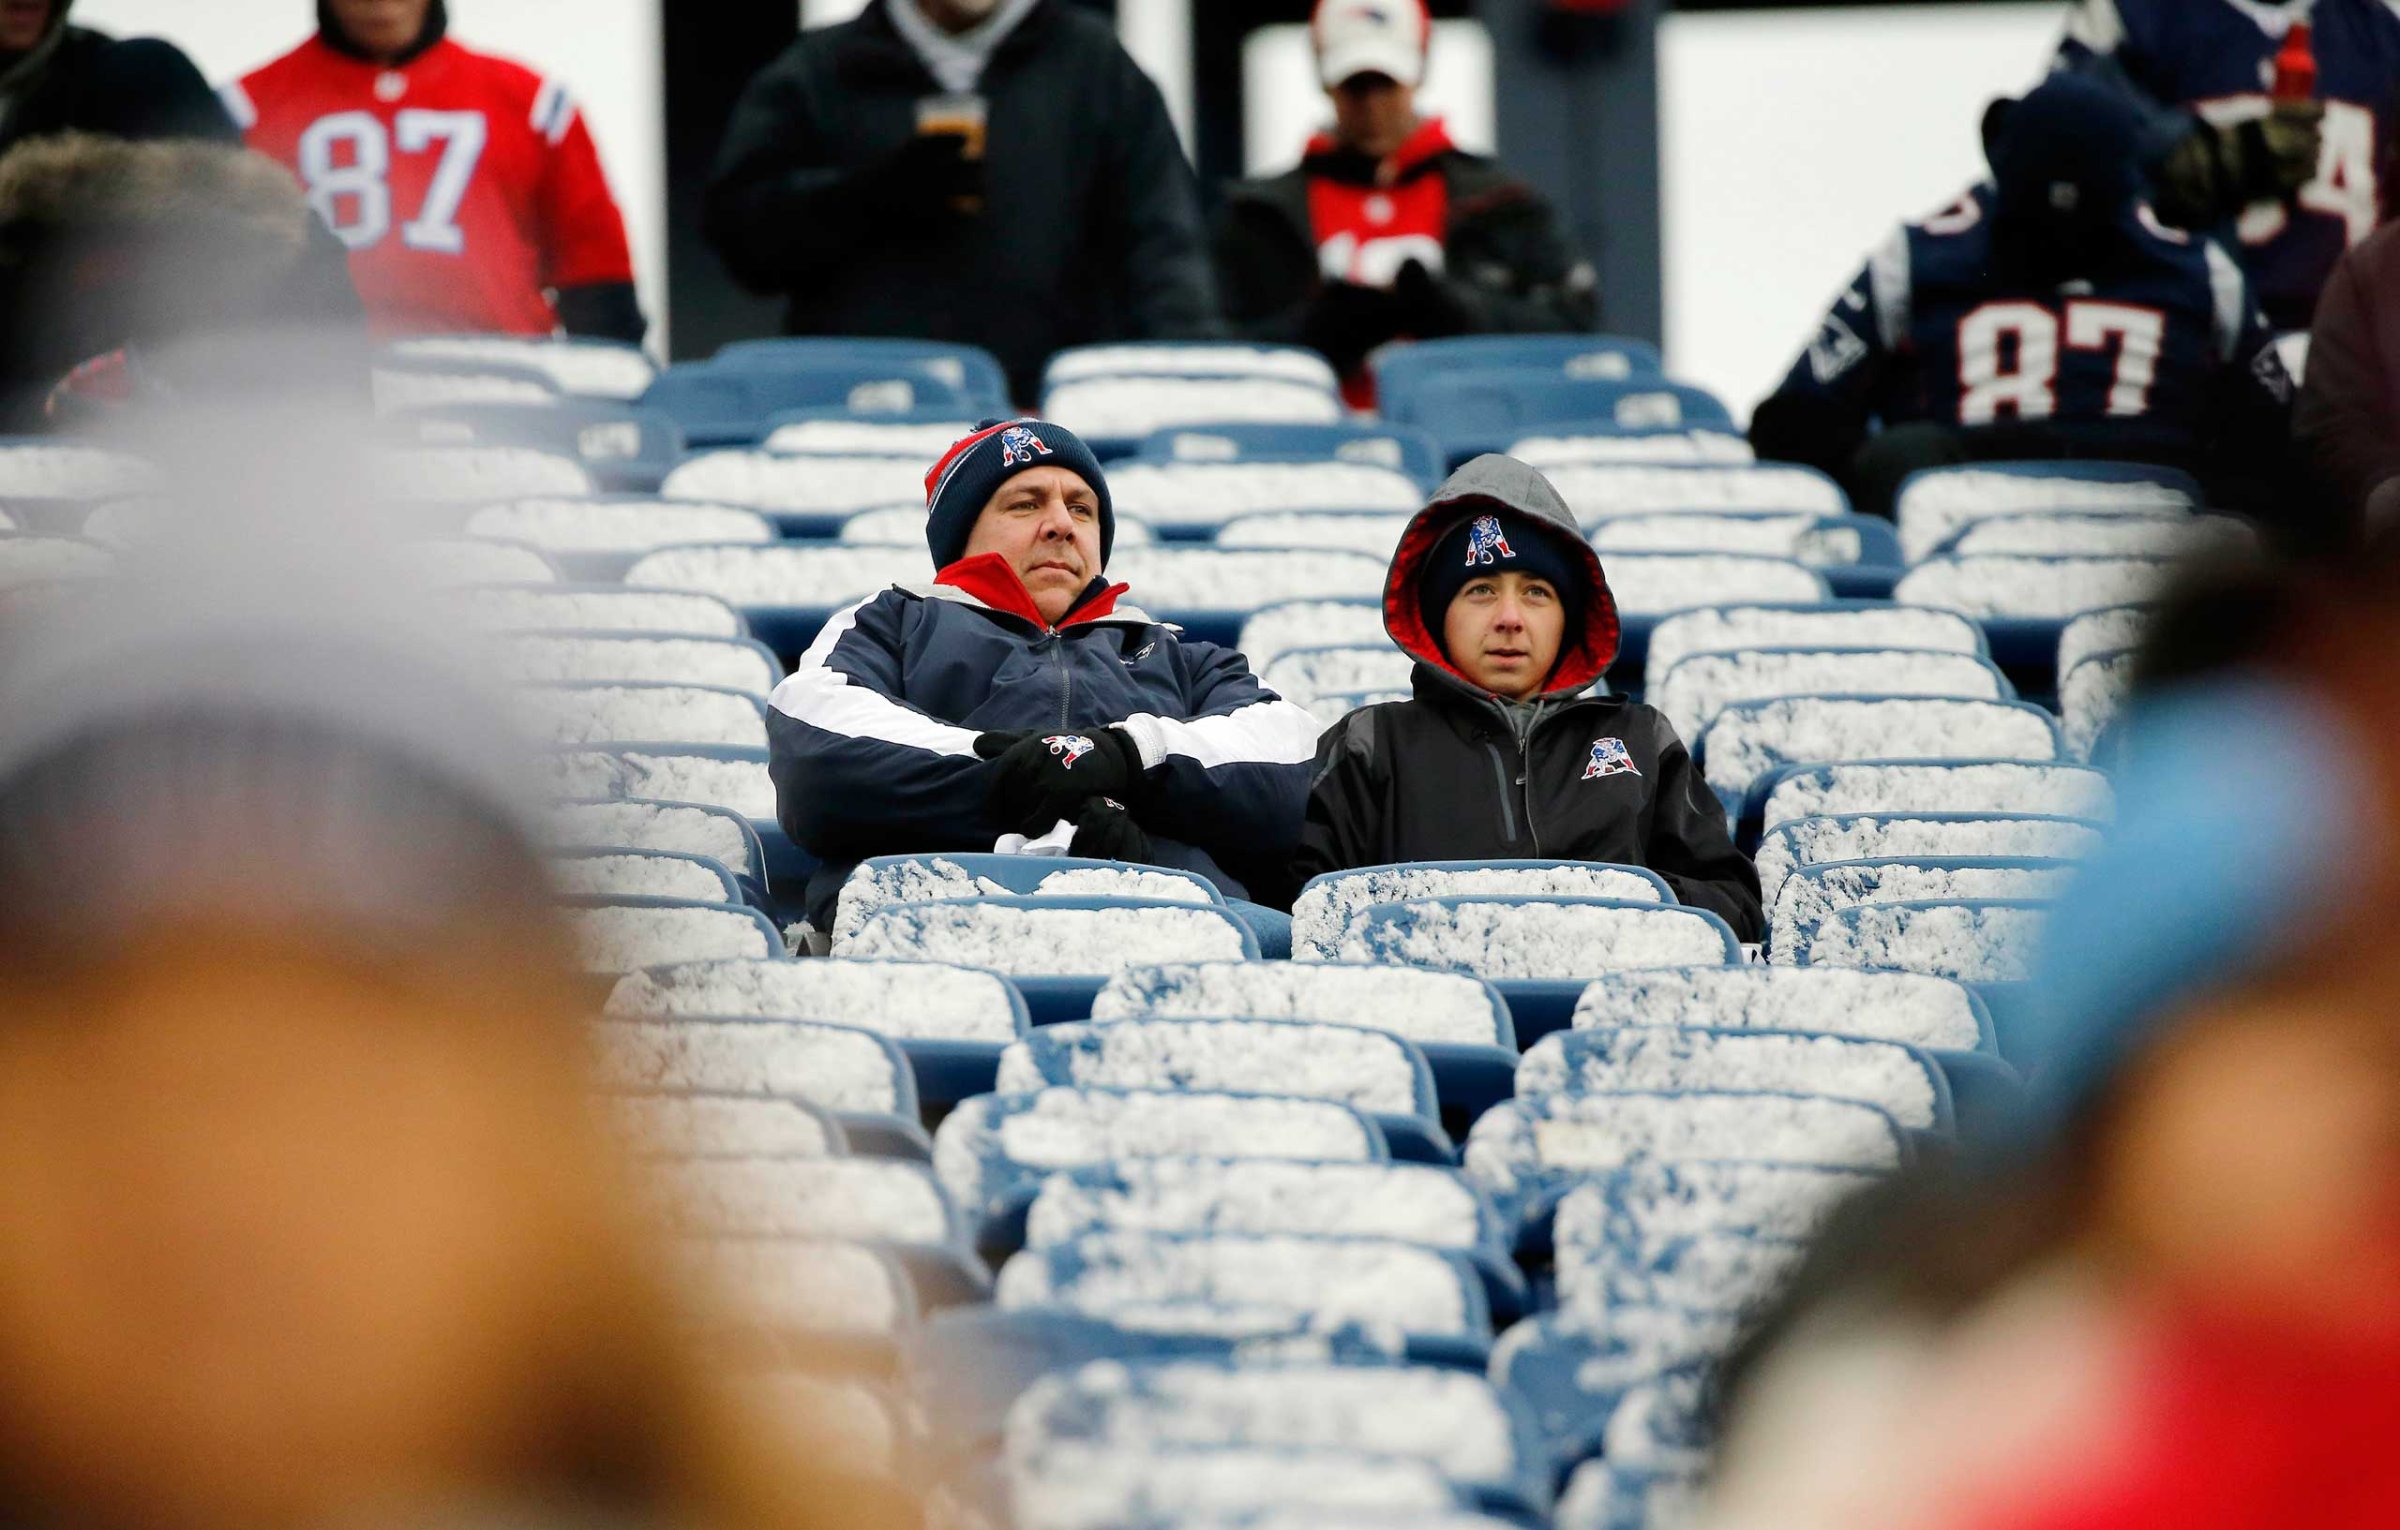 New England Patriots fans sit in seats coated by a light morning snow before an NFL football game between the Patriots and the Denver Broncos on Nov. 2, 2014, at Gillette Stadium in Foxborough, Mass.